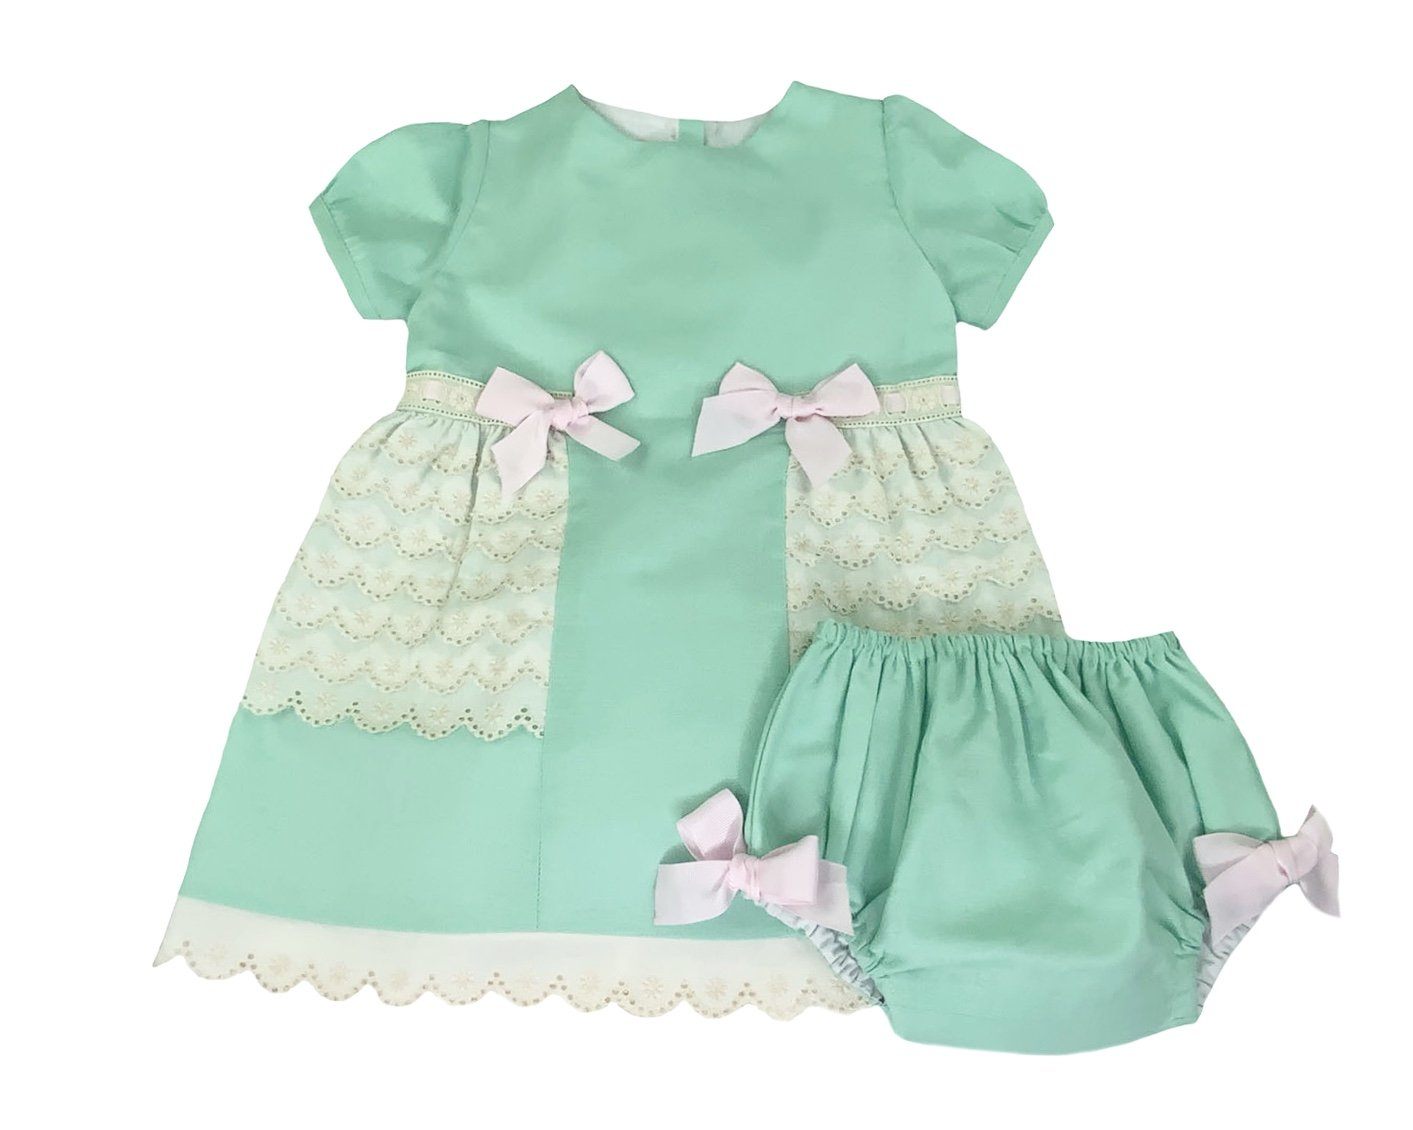 Flutter Sleeves Mint Girl's Dress and Bloomers Set-Children's Clothing Store Dress & Bloomers Set Alfa Baby Boutique 18 Green Female